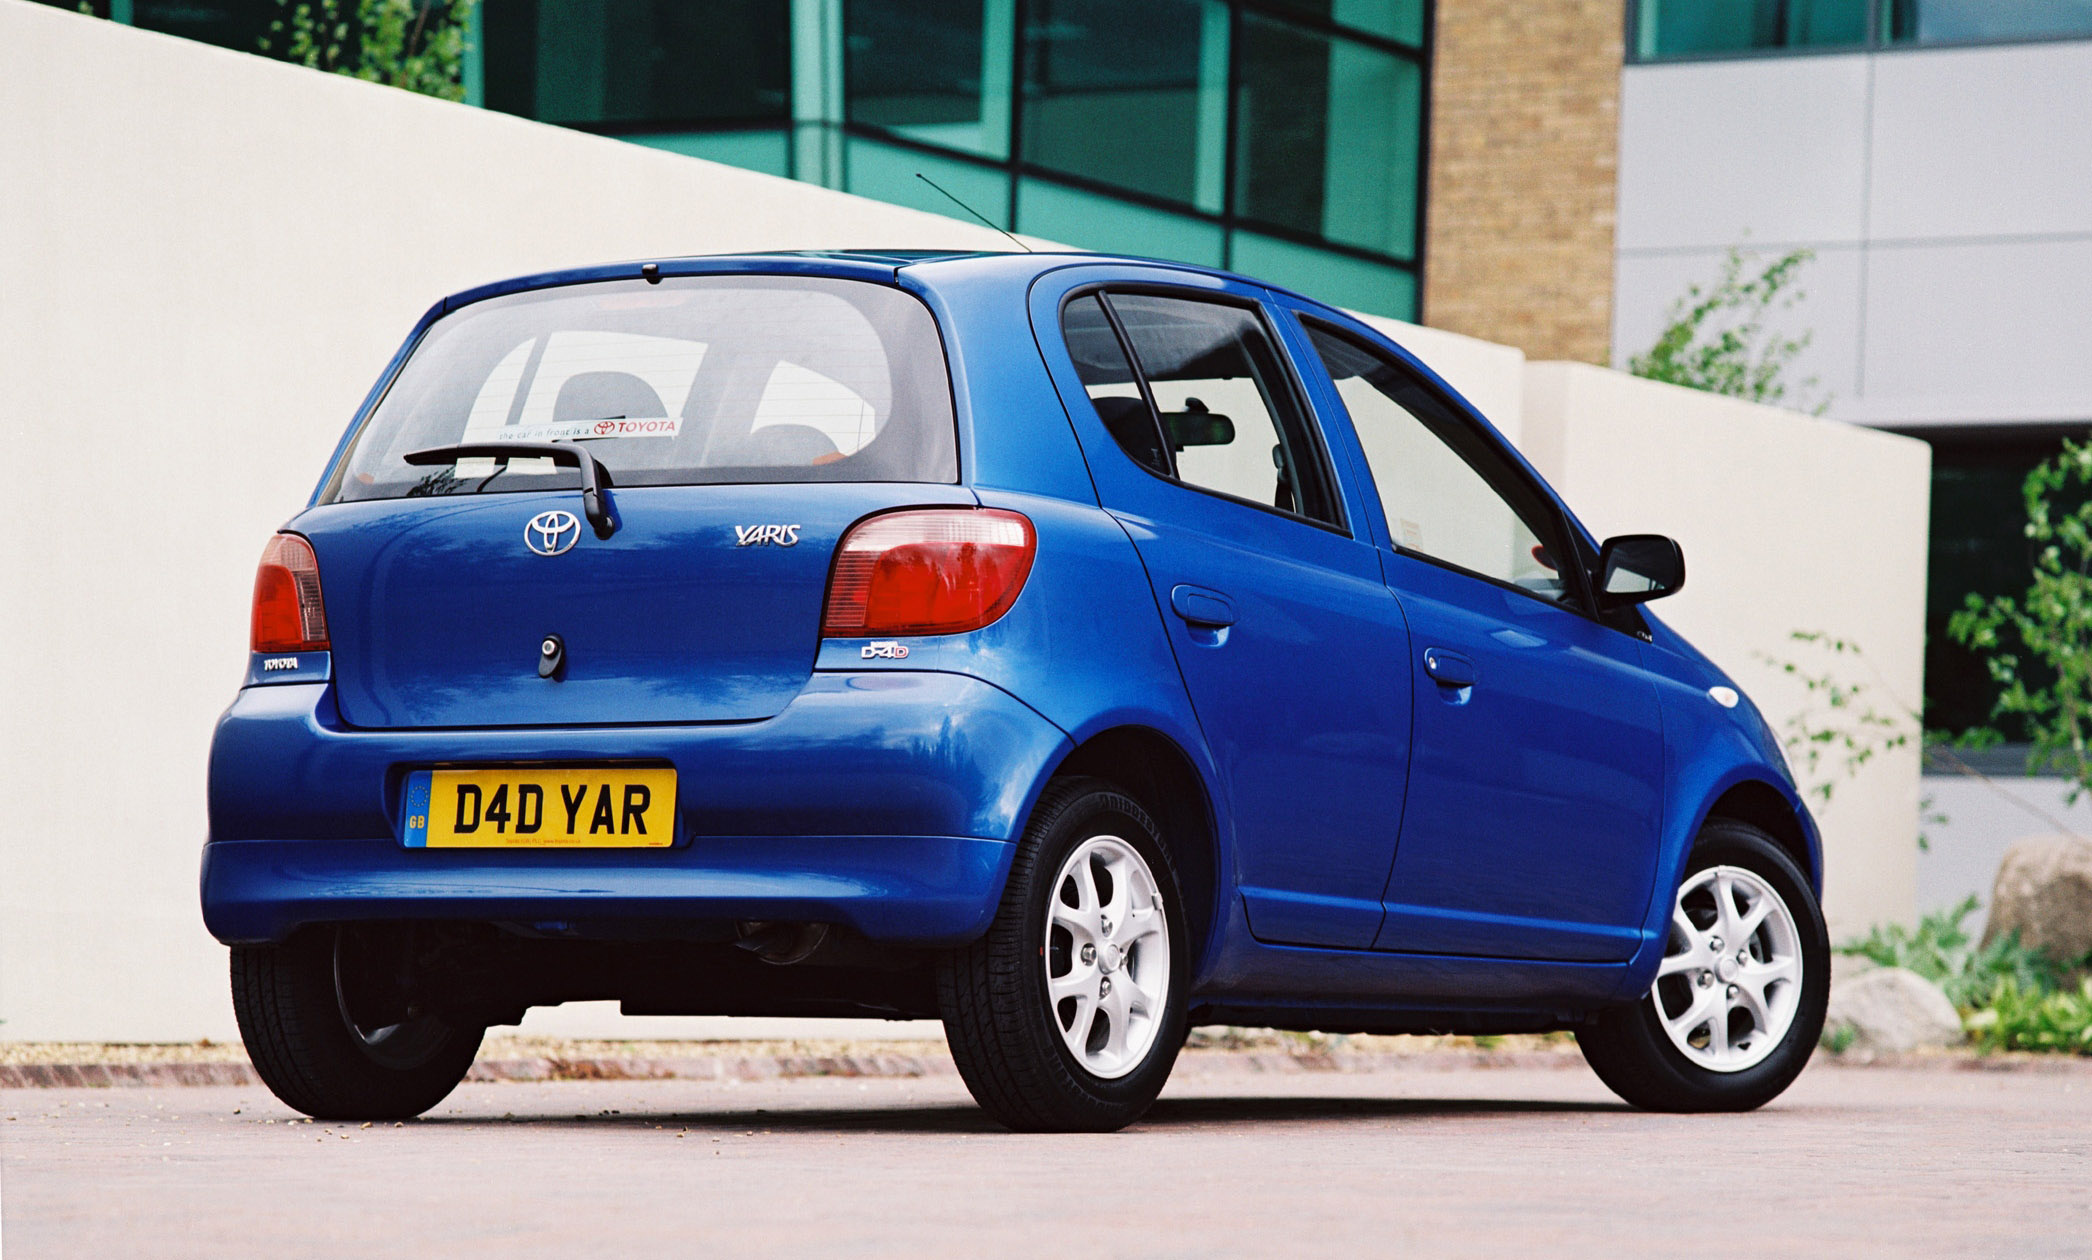 Toyota Yaris, Year 1999, High-definition picture, Compact hatchback, 2100x1260 HD Desktop